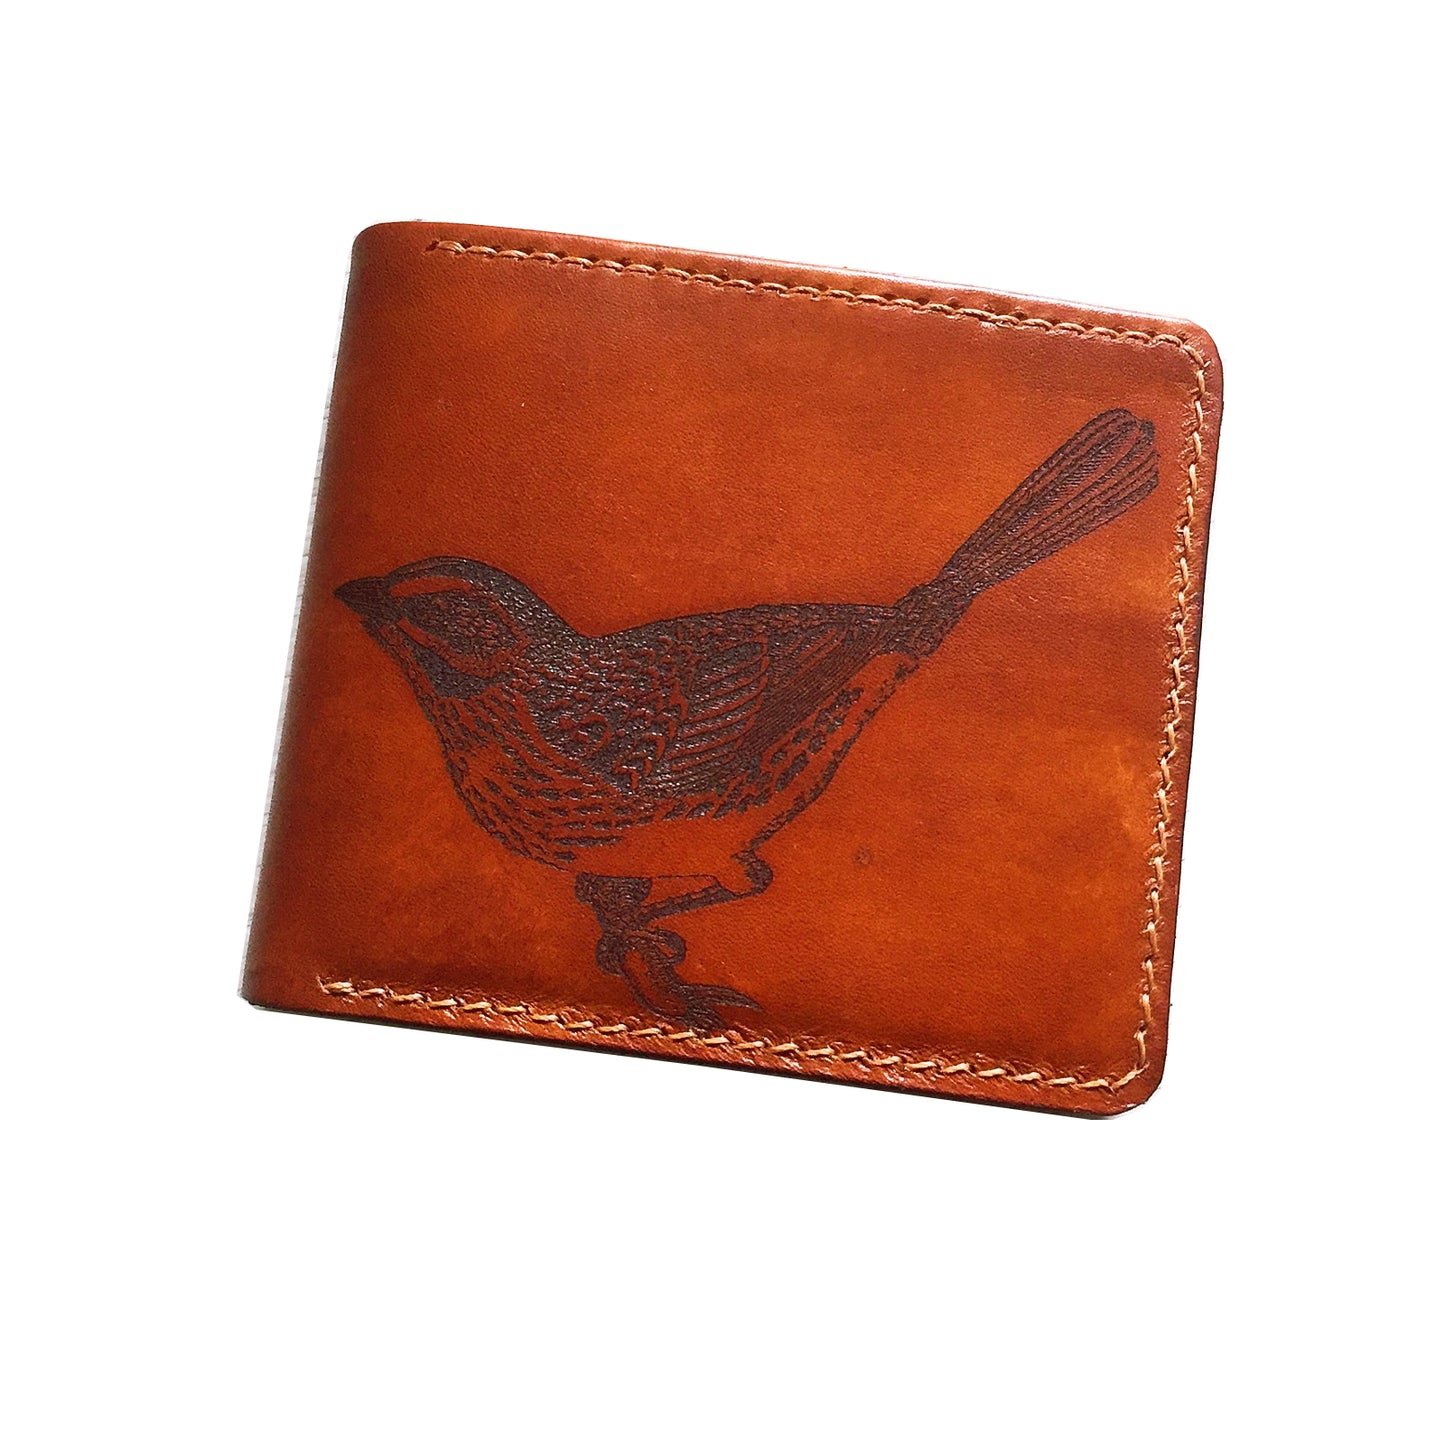 Mayan Corner - Drawing bird leather handmade men's wallet, custom gifts for him, father's day gifts, anniversary gift for men